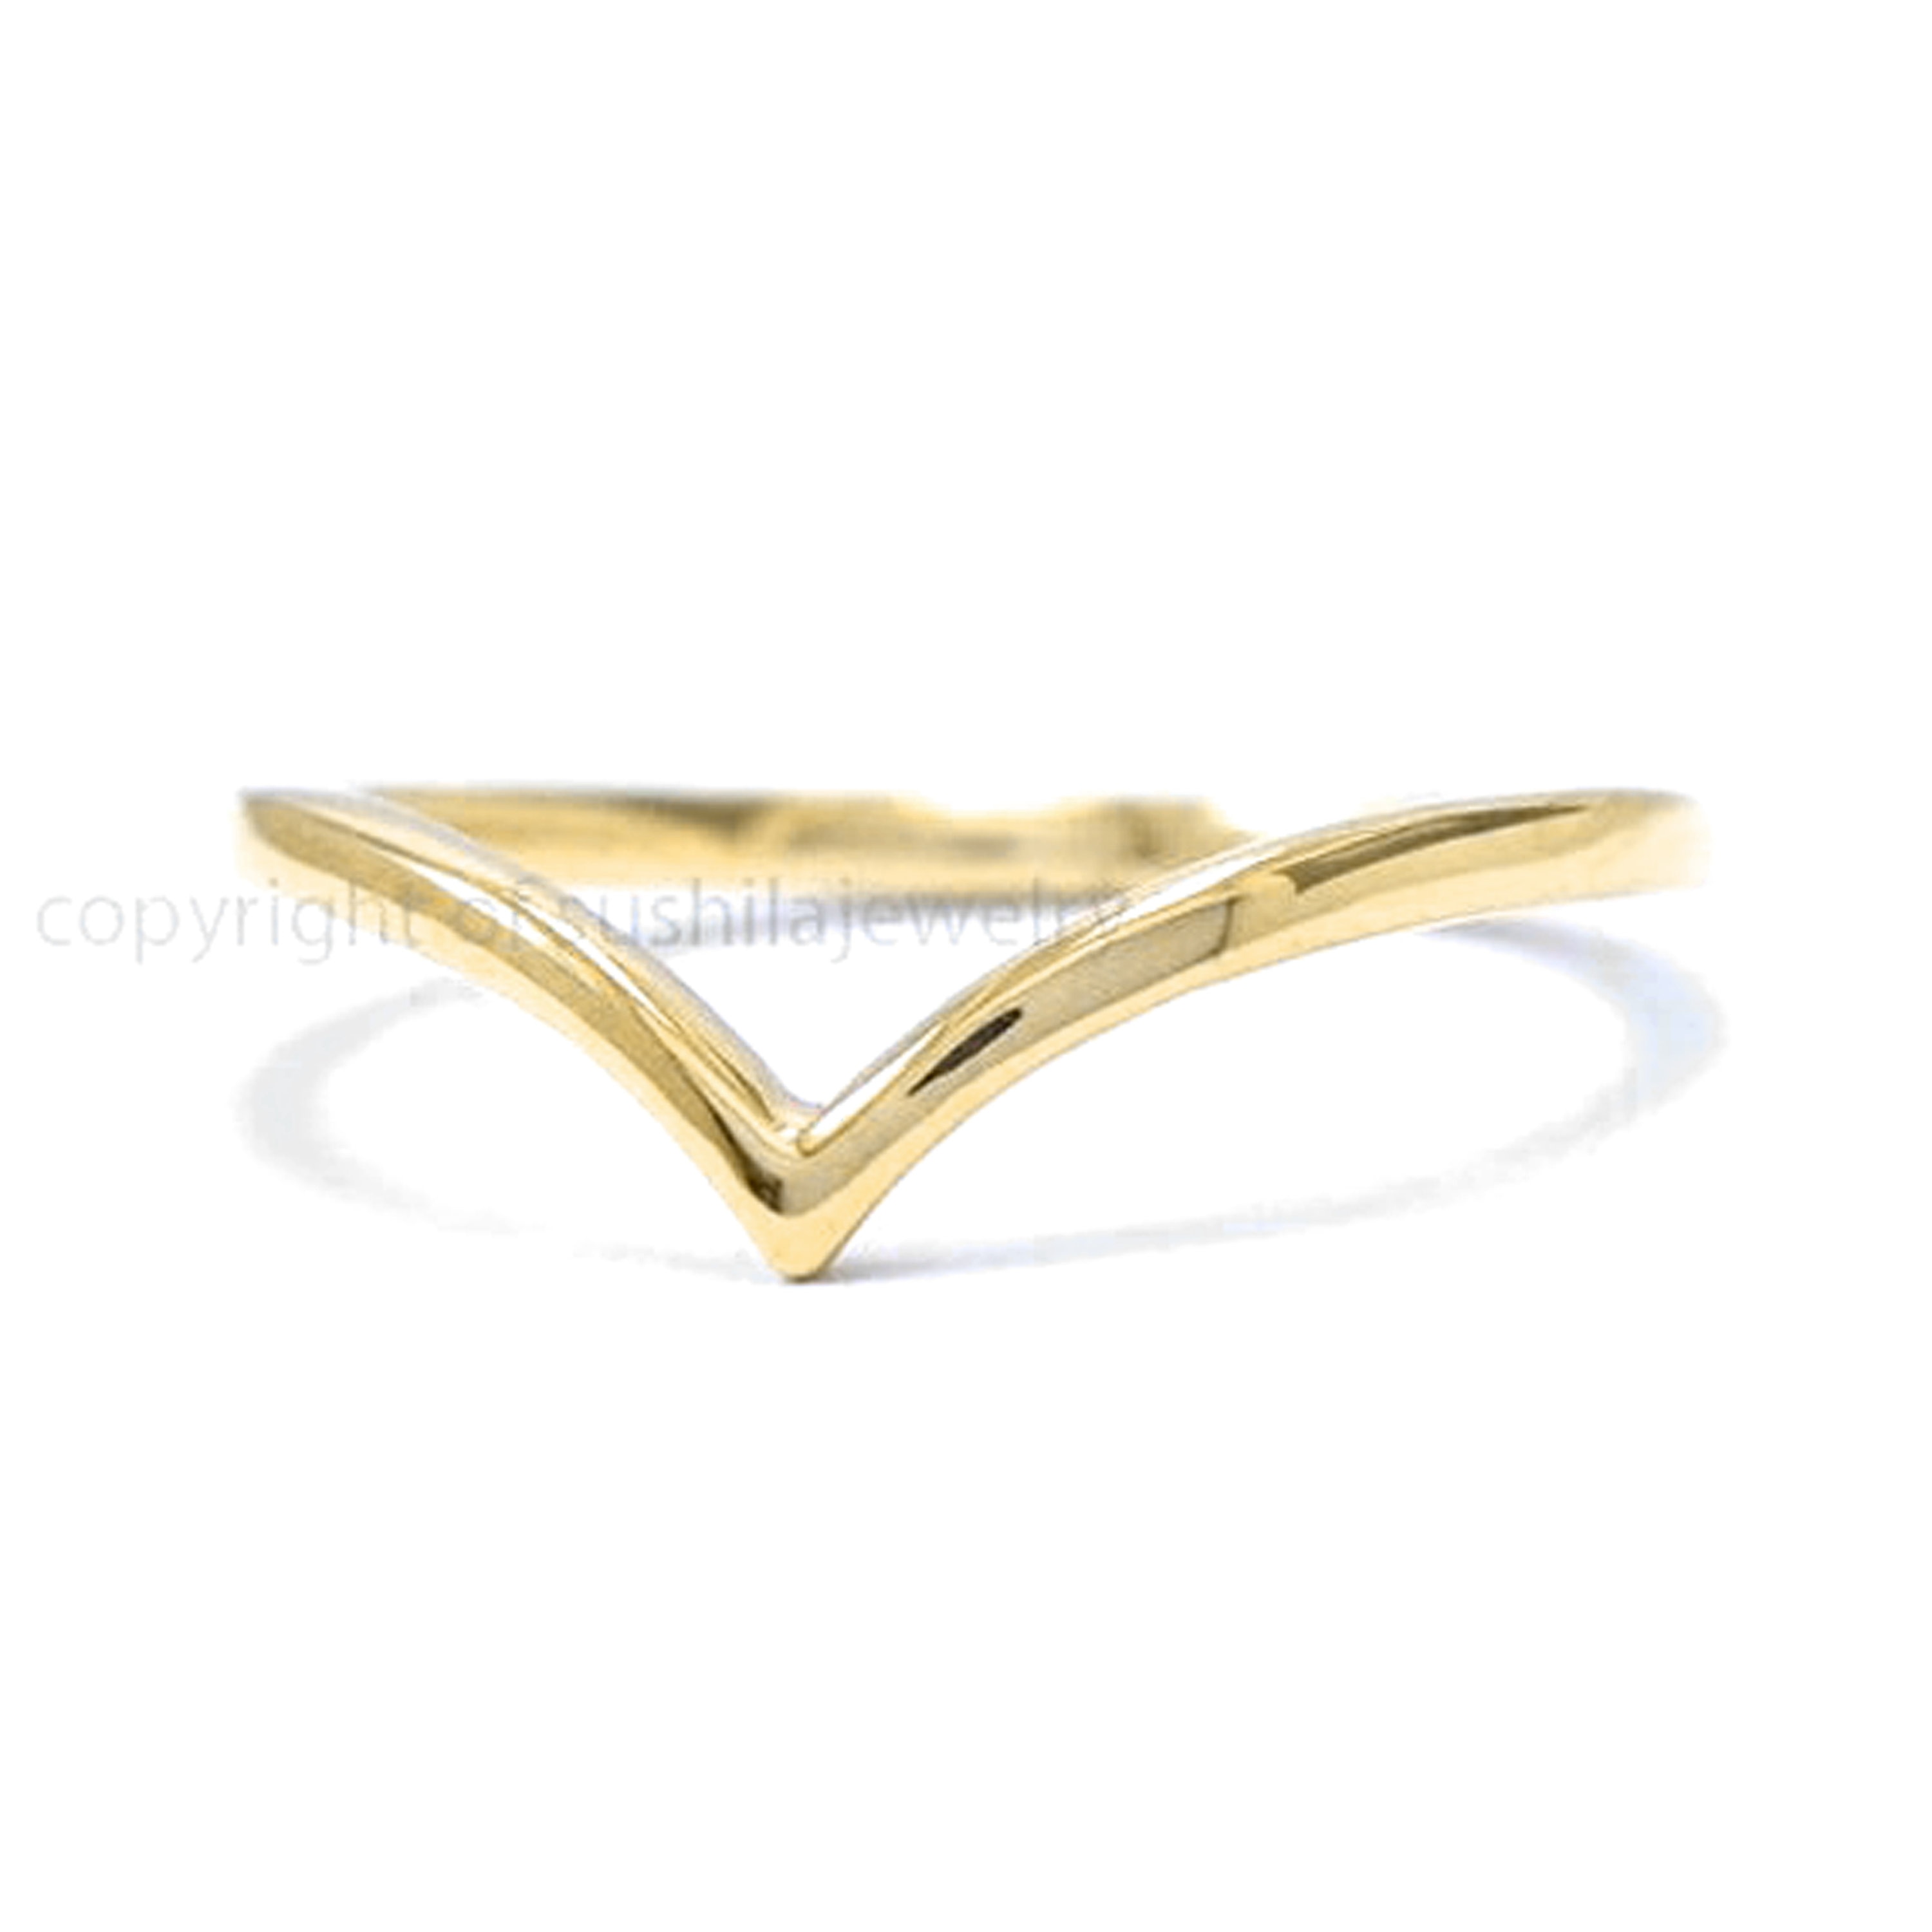 Lucky Gold Ring - ₹15,600 Pearlkraft Wedding Band Collection